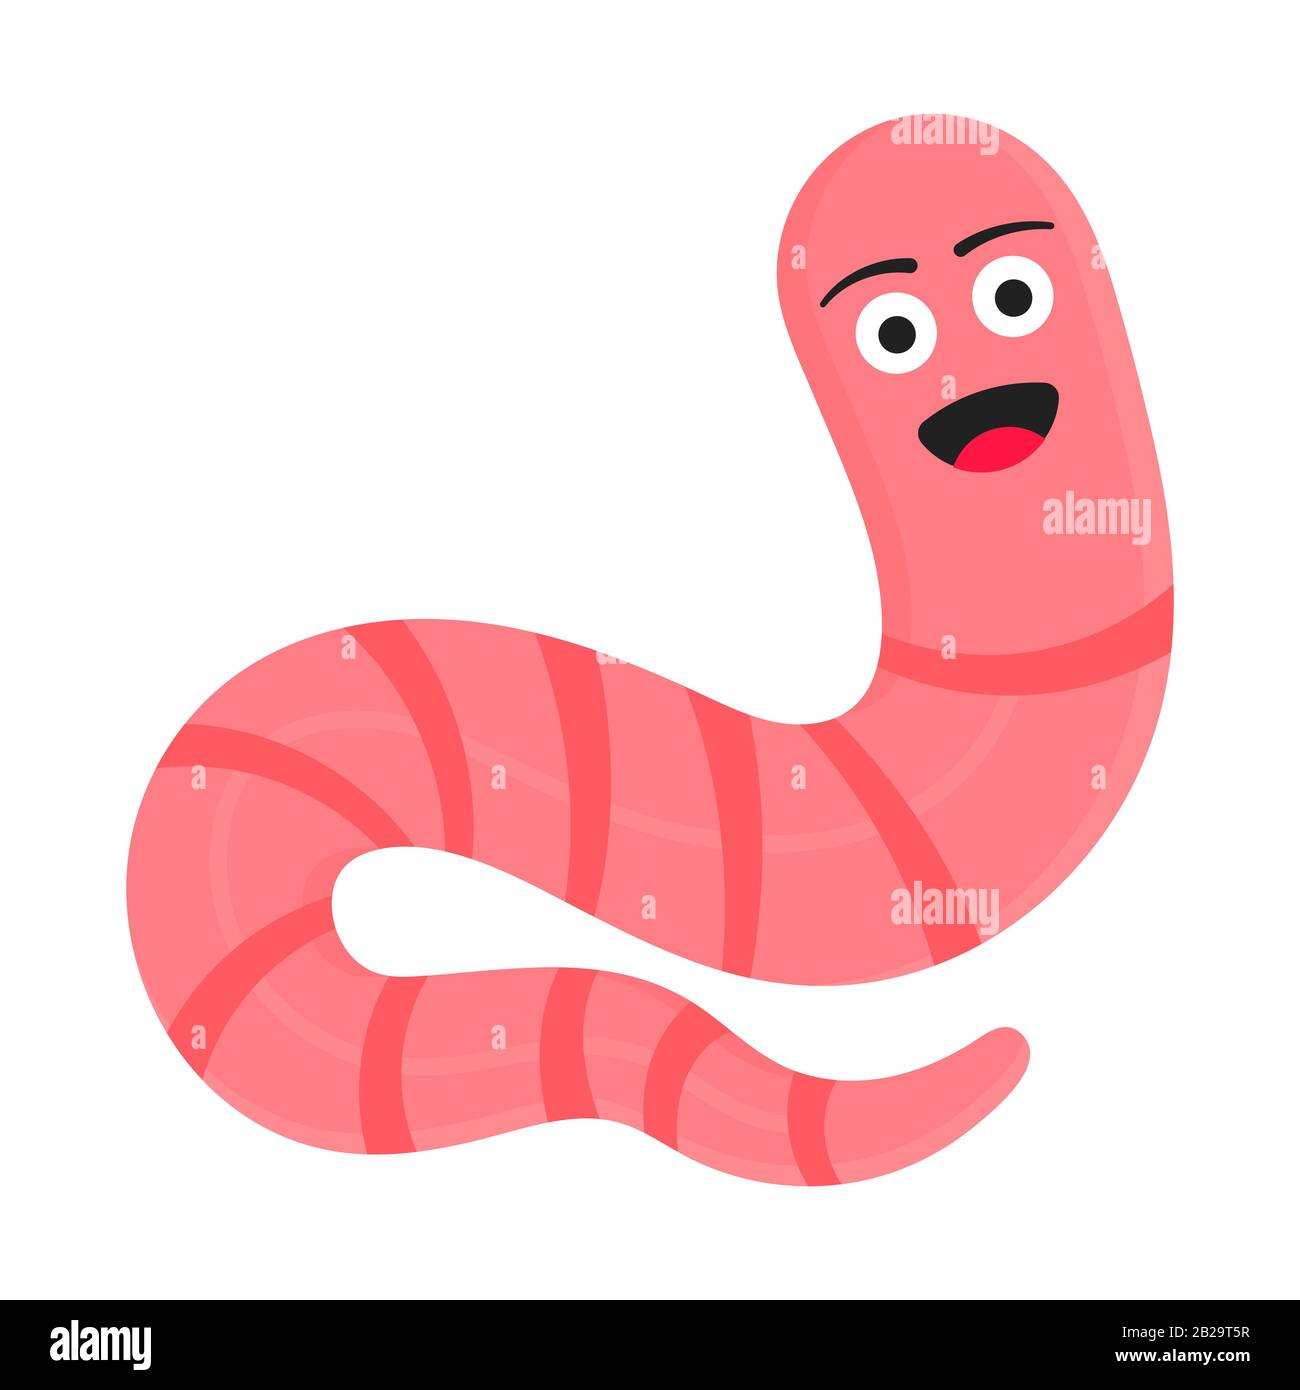 Earthworm cartoon character icon sigh. Worm with face expression